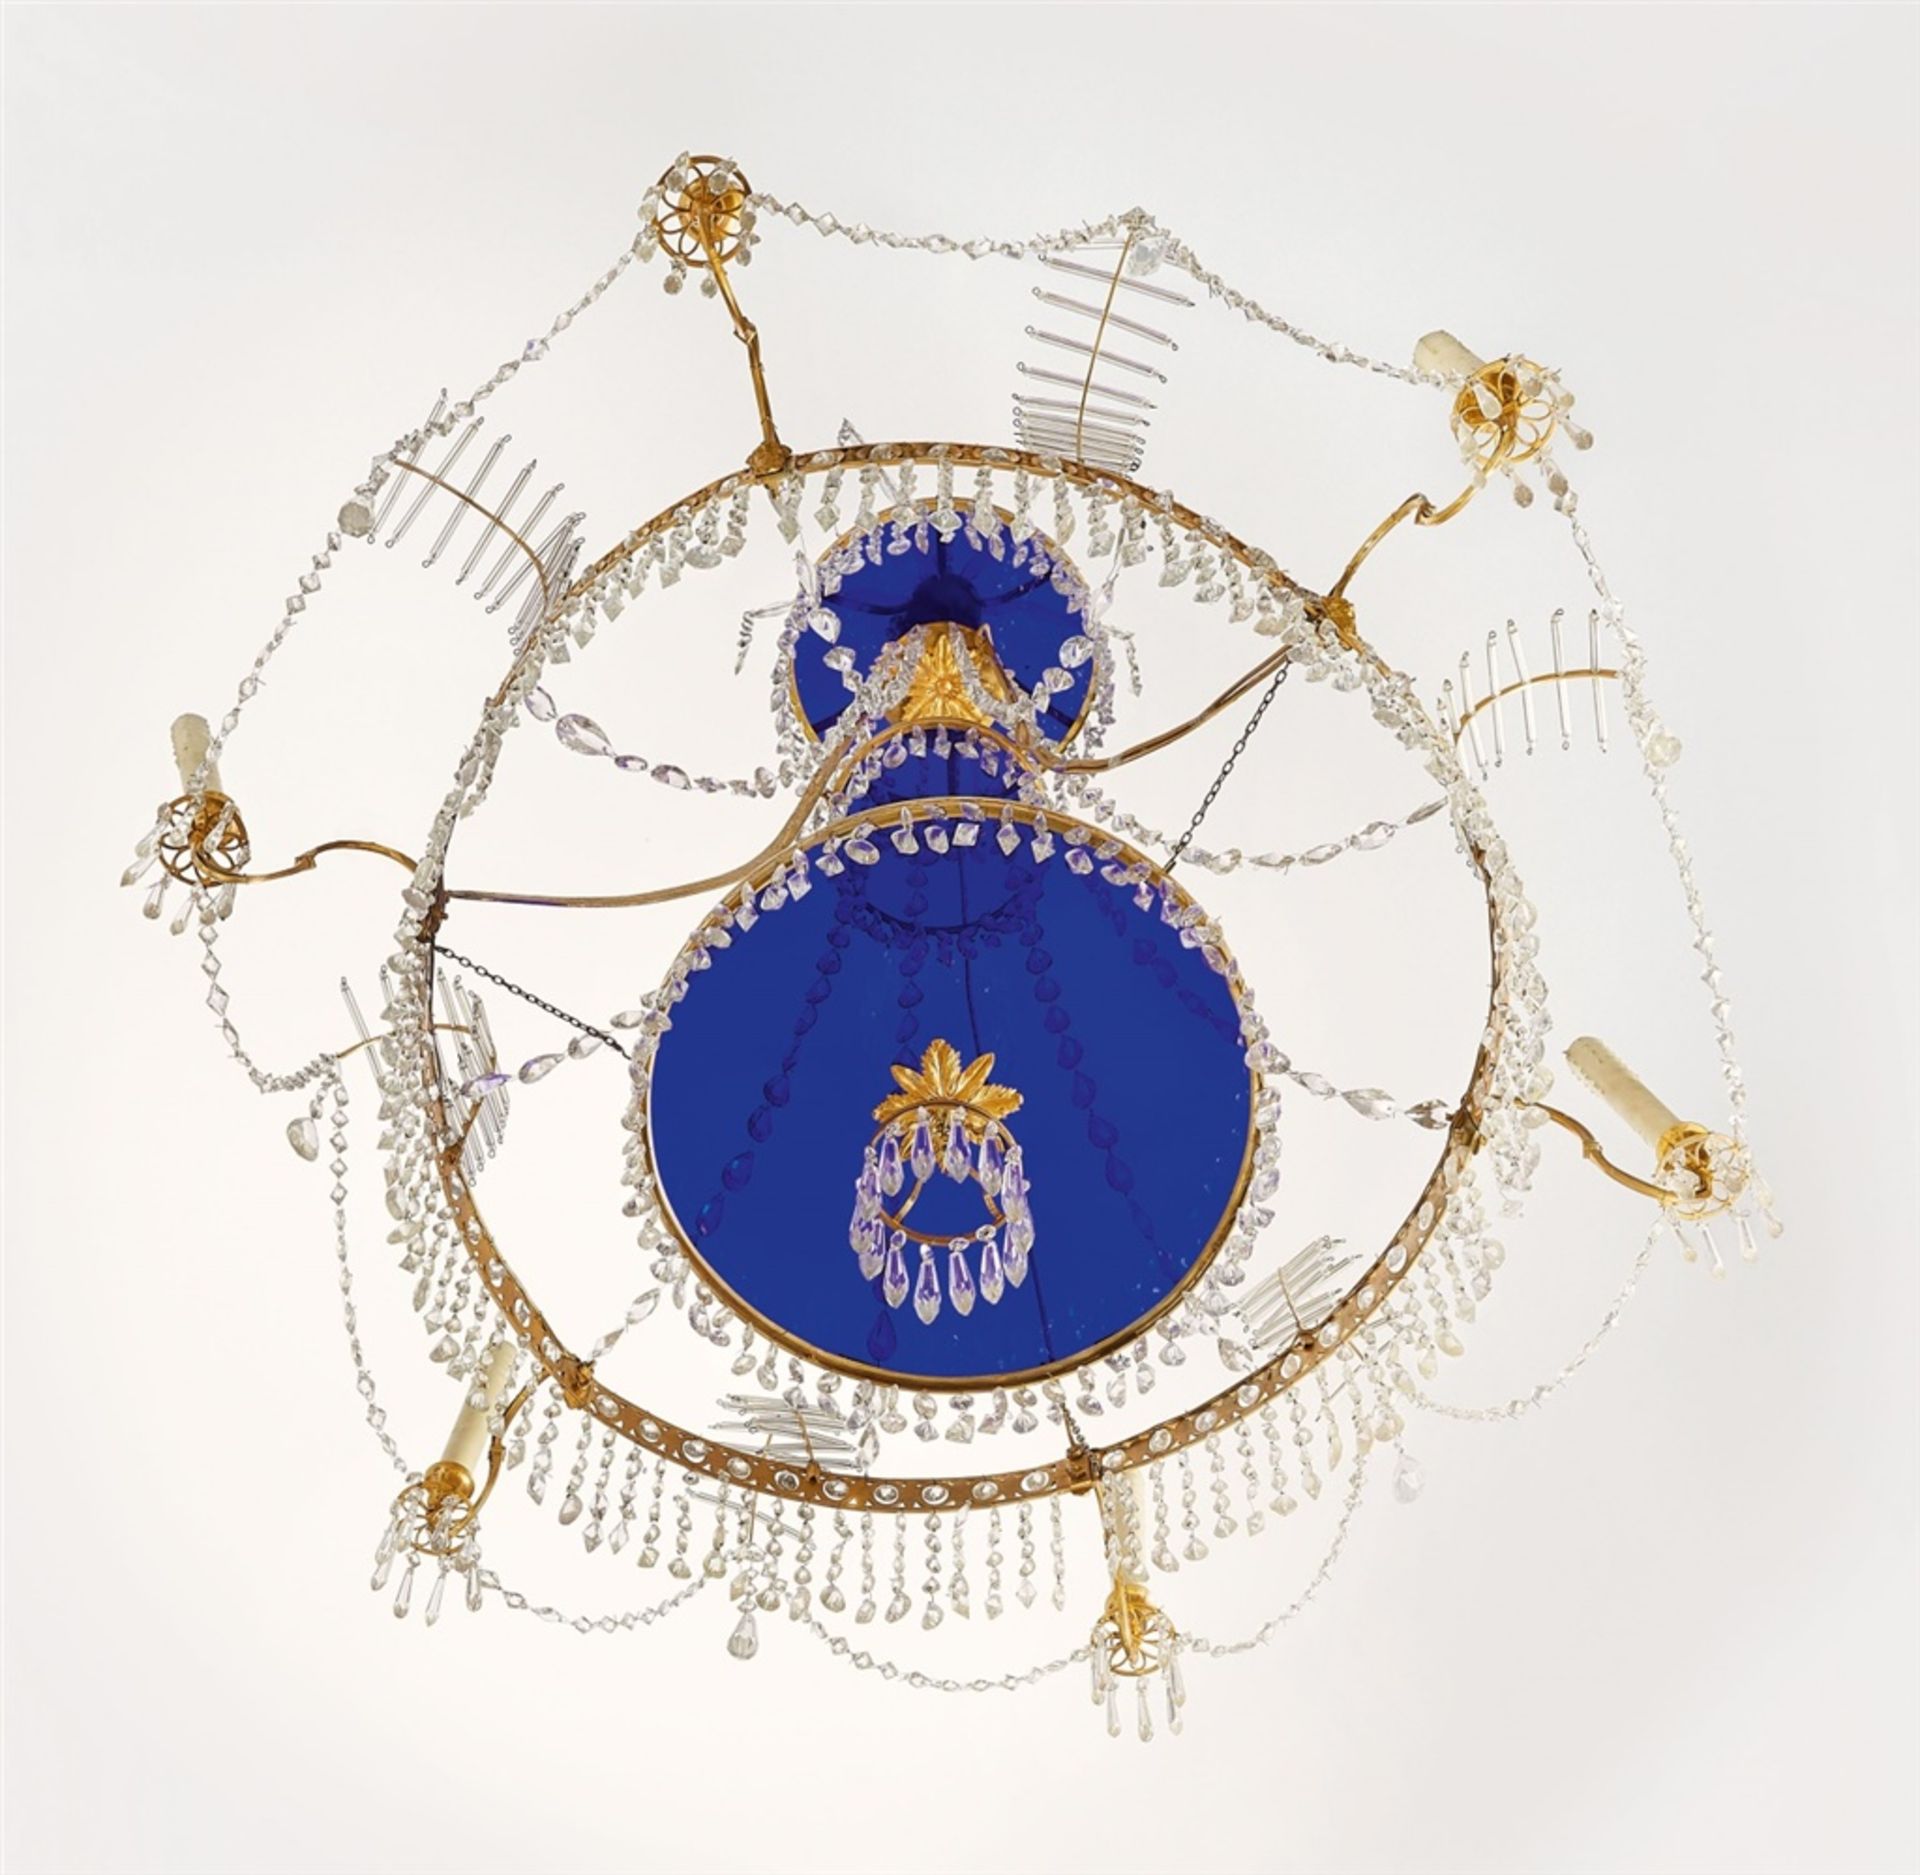 A Neoclassical chandelierOrmolu chandelier with cut glass droplets and blue glass panes. Six